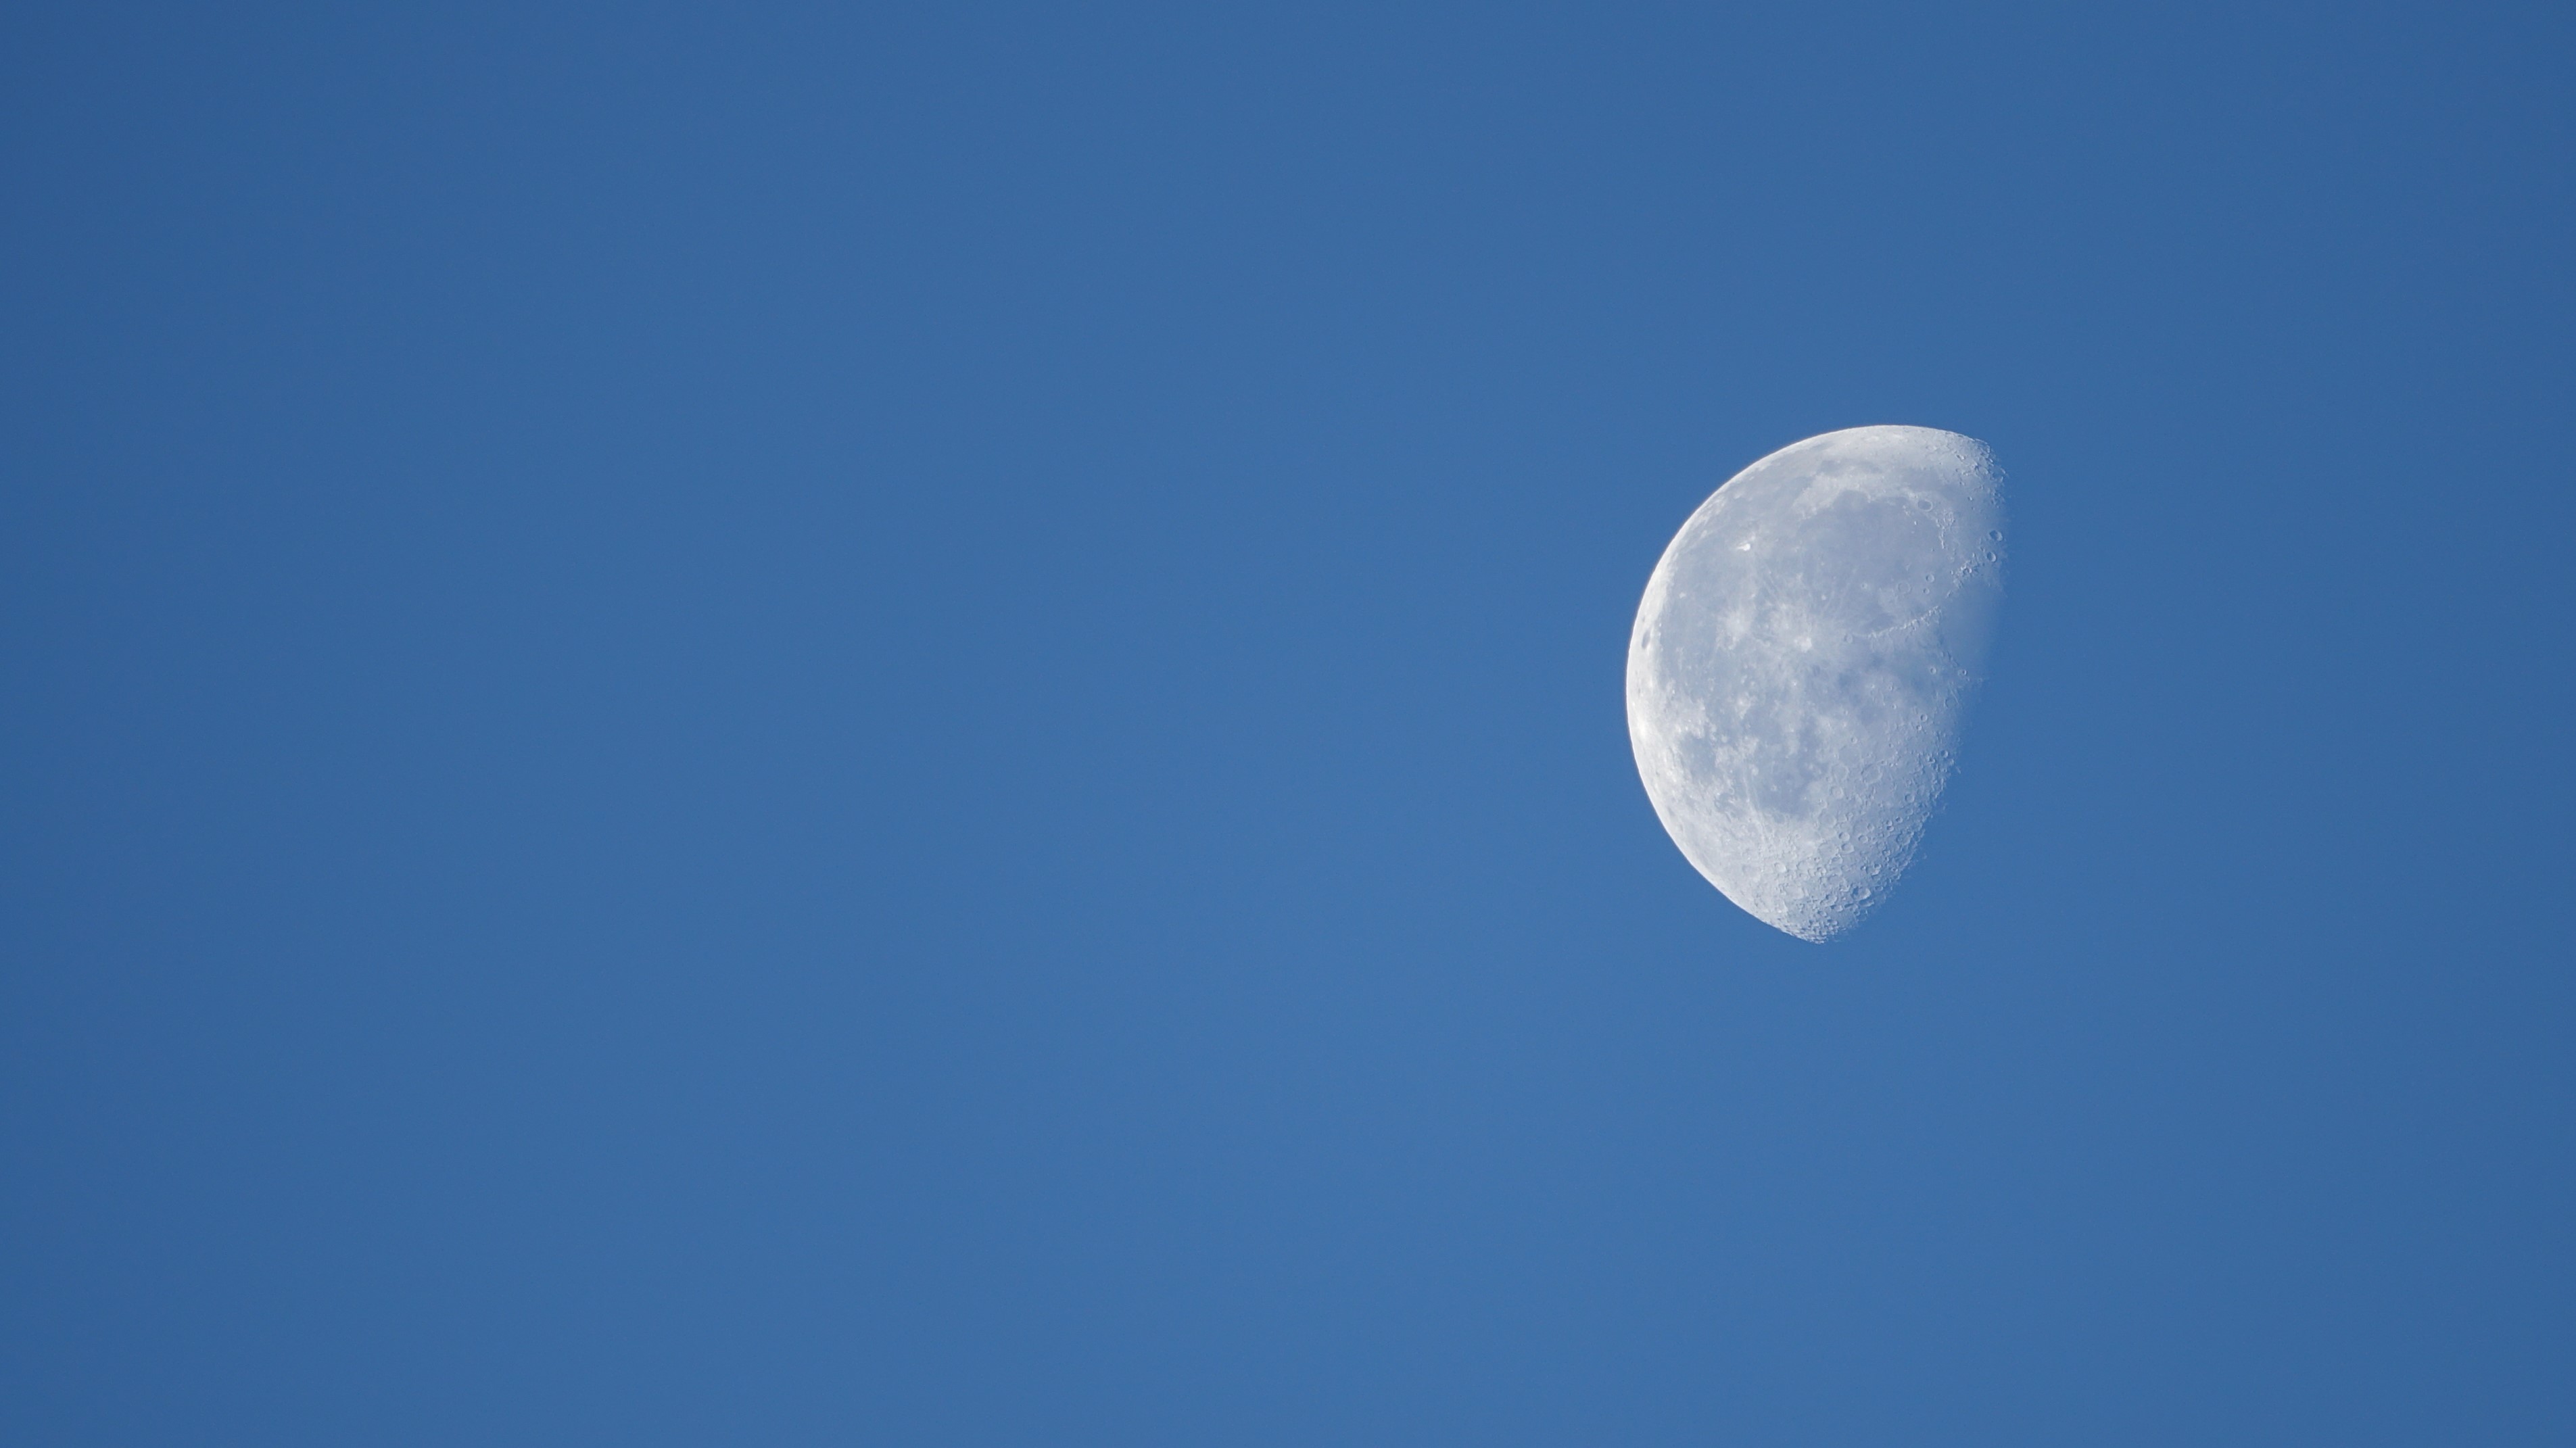 General 3810x2142 Moon sky nature blue background